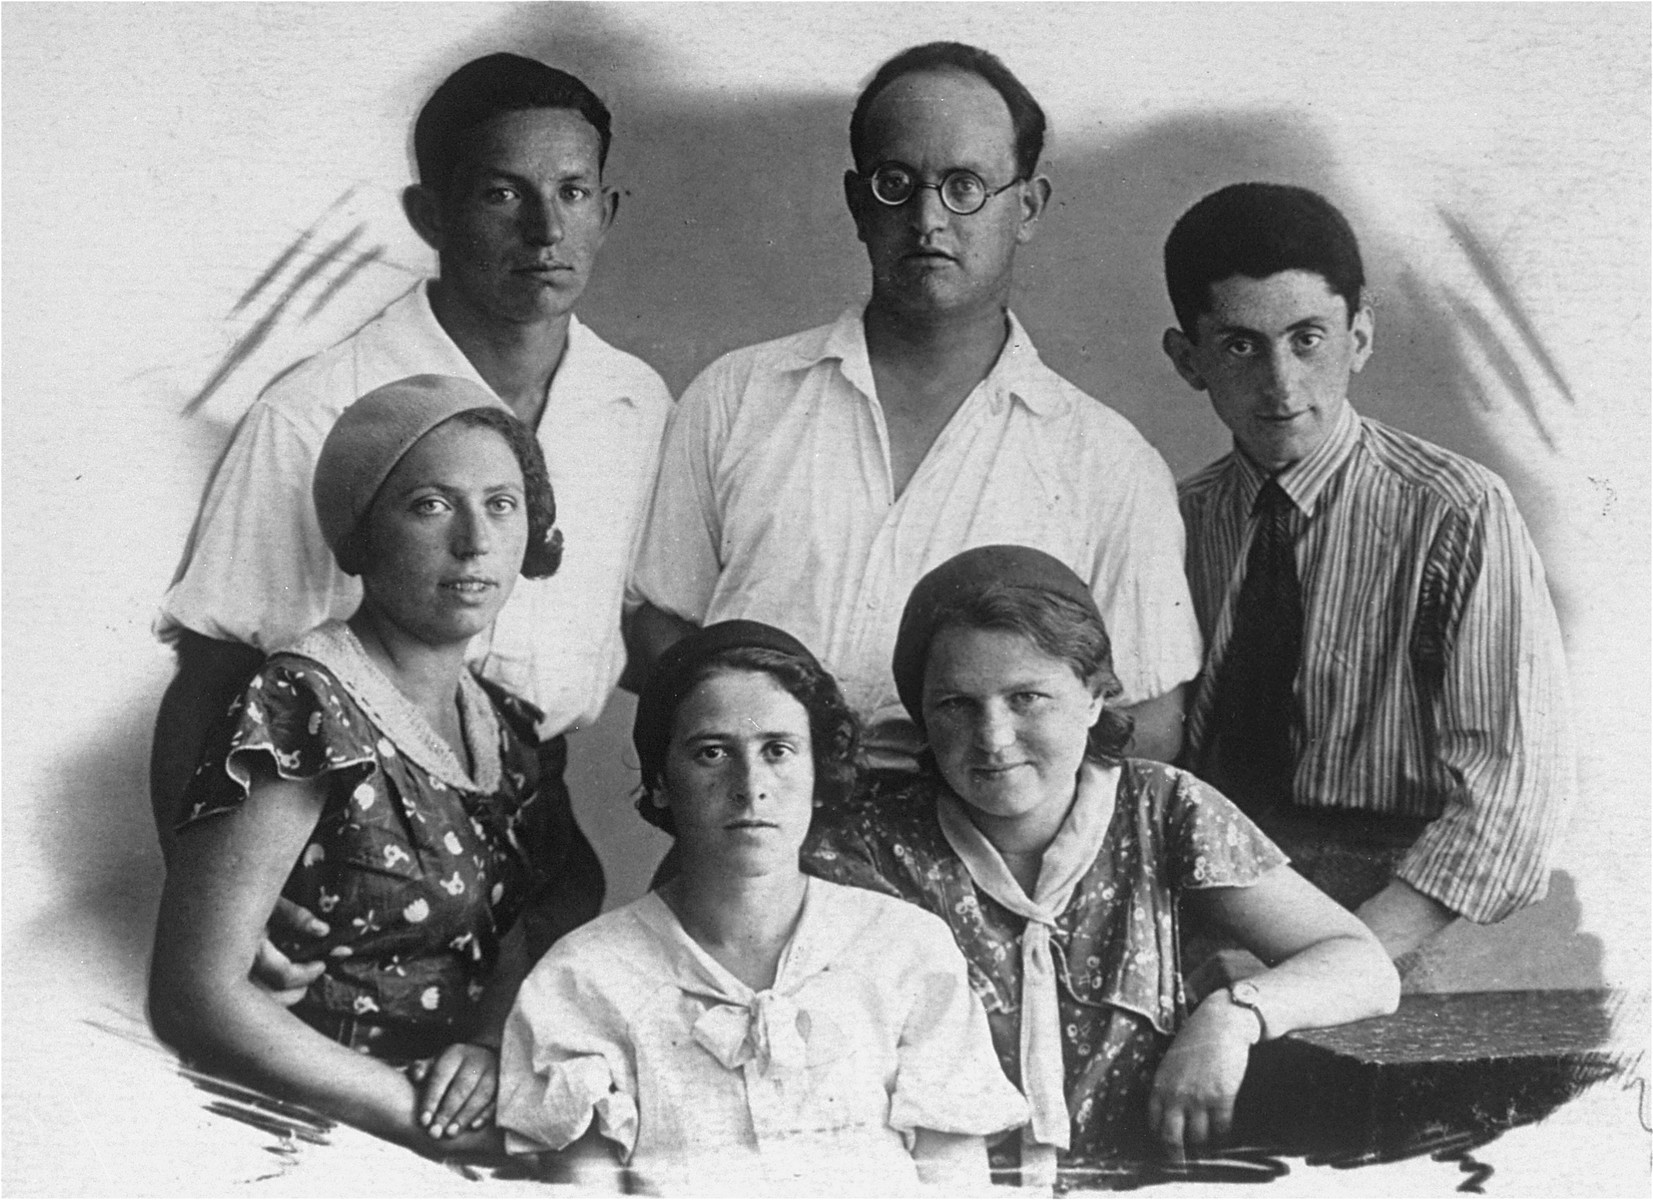 Studio portrait of members of the Rudashevsky family in Vilna. 

Pictured in the back row from left to right are: Shika Jurer, Avraham Jurer and Mula Mirsky.  In the front row from left to right are: Hannah Jurer, Rosa Rudashevsky, and Sarah Rudashevsky.